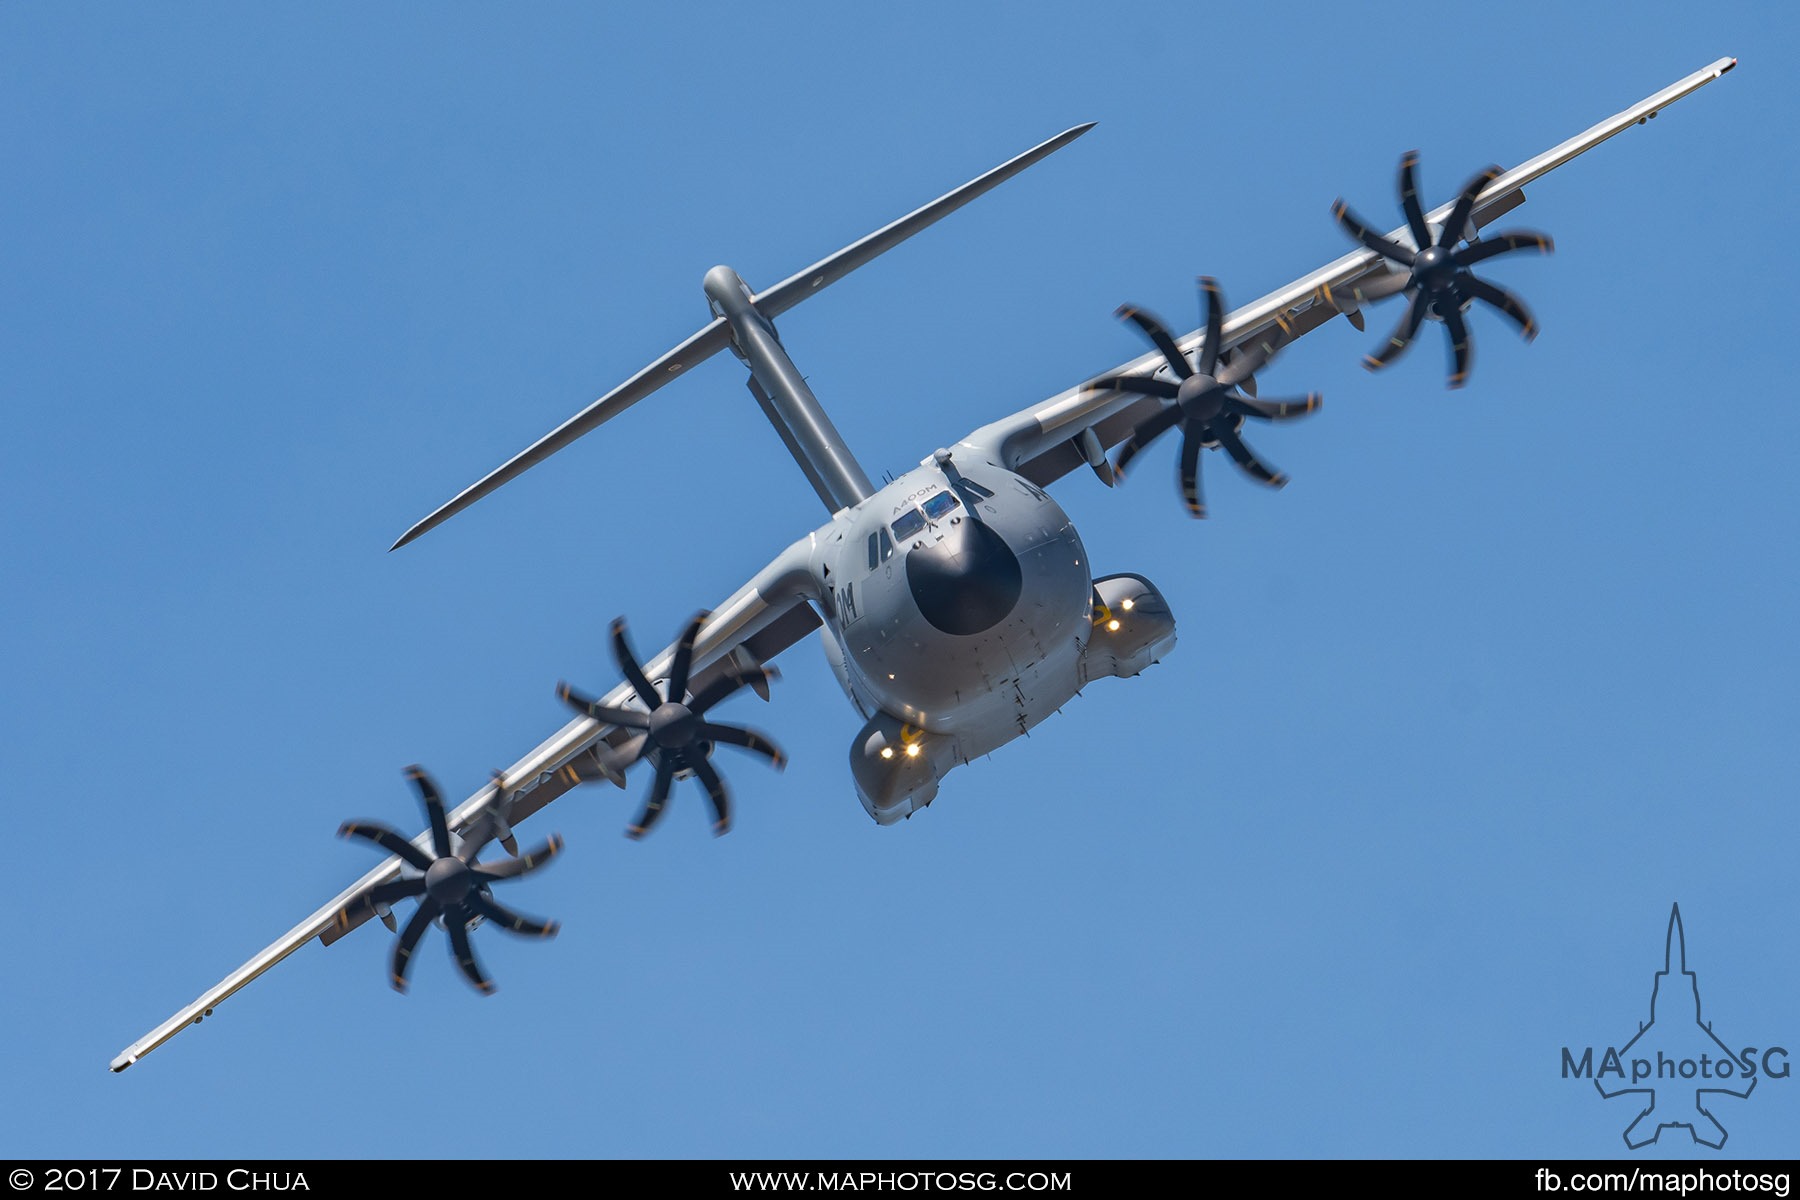 7. Airbus A400M Military Transport shows of it’s capabilities in the aerial display segment.